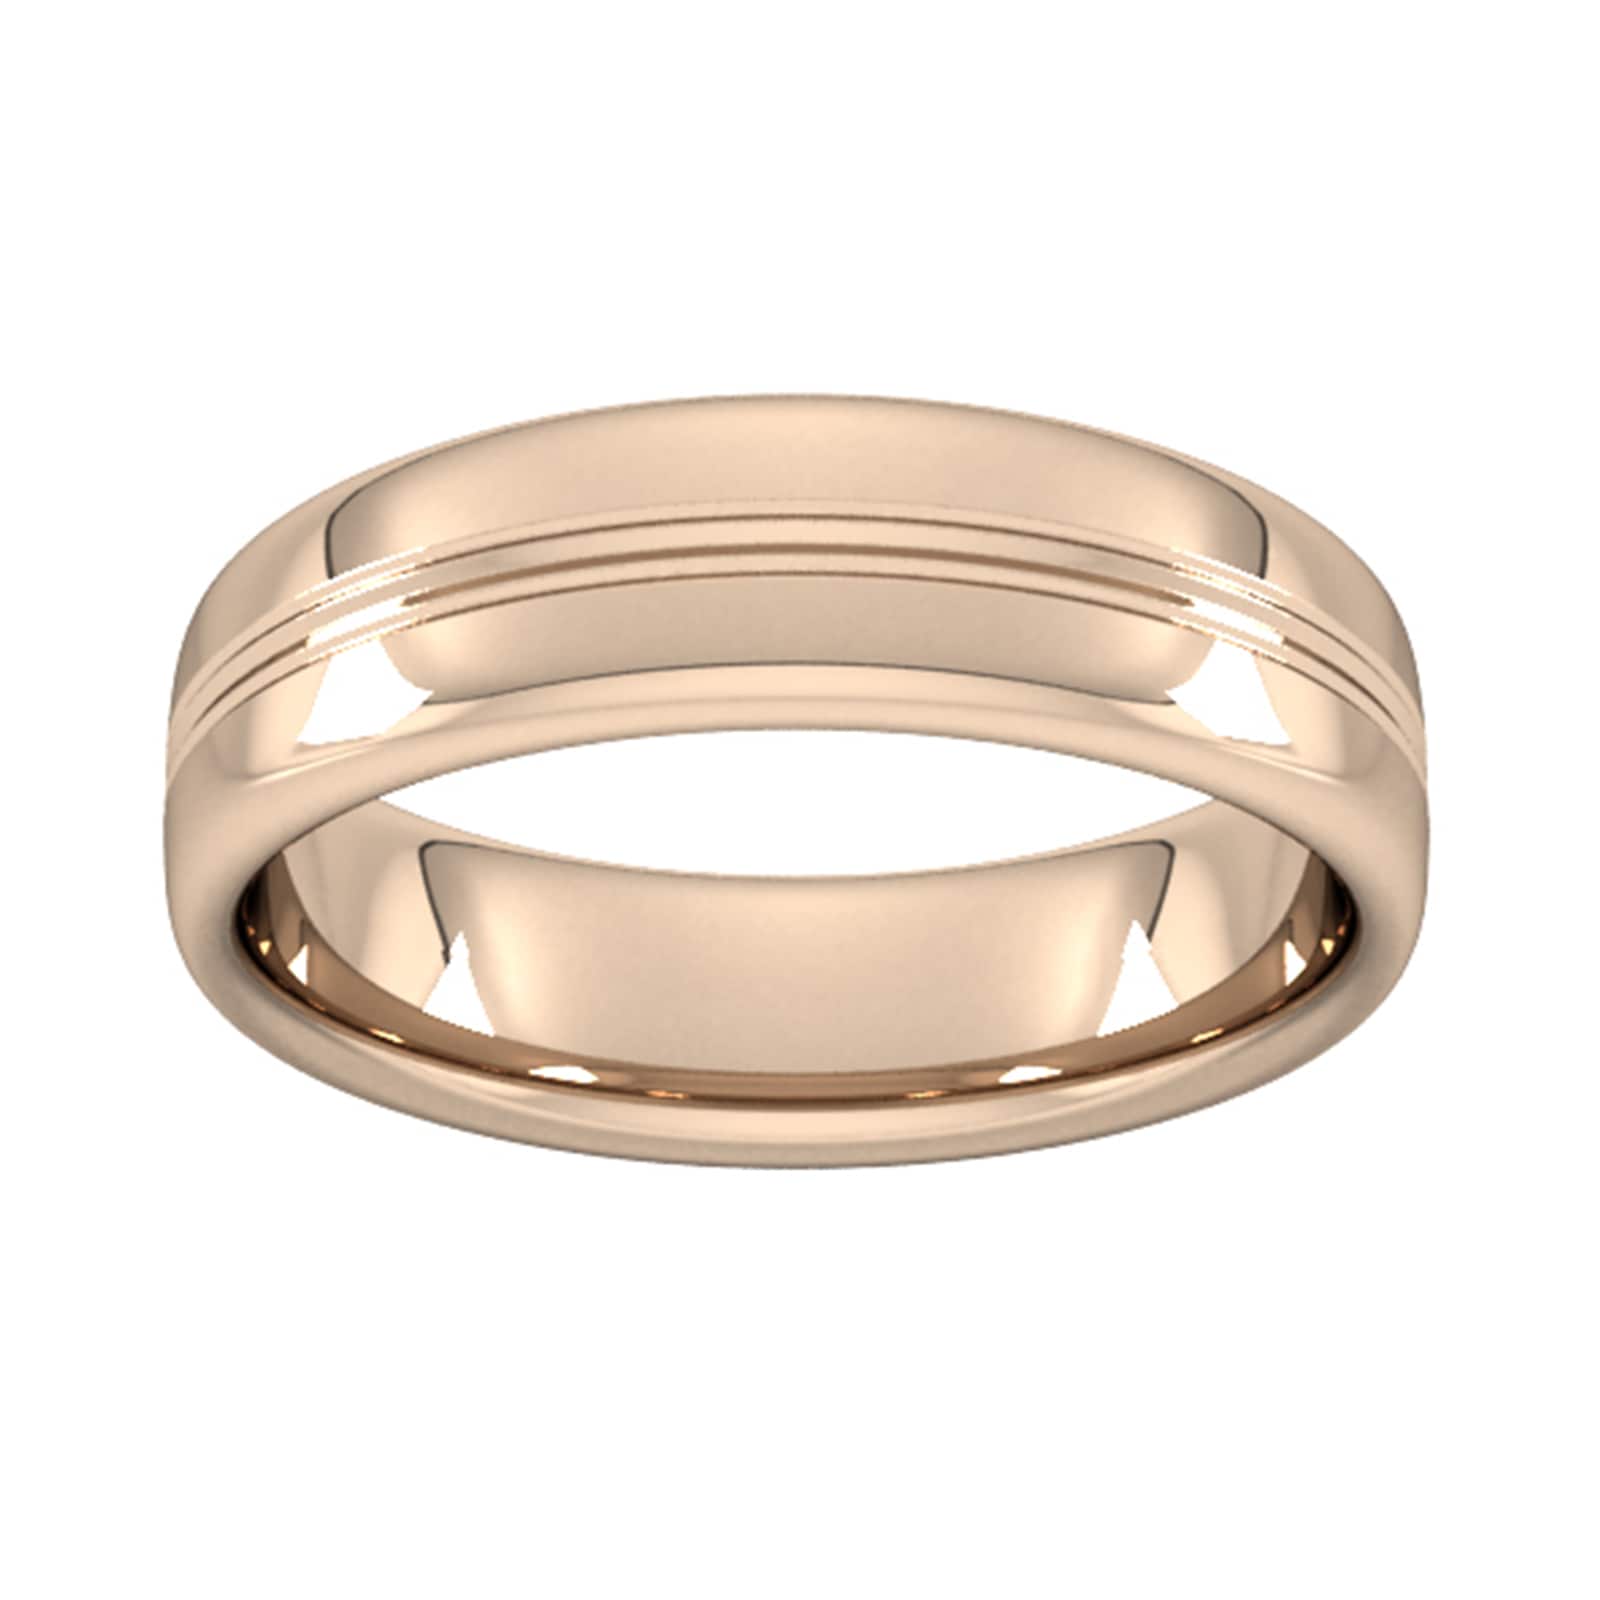 6mm Slight Court Standard Grooved Polished Finish Wedding Ring In 9 Carat Rose Gold - Ring Size S